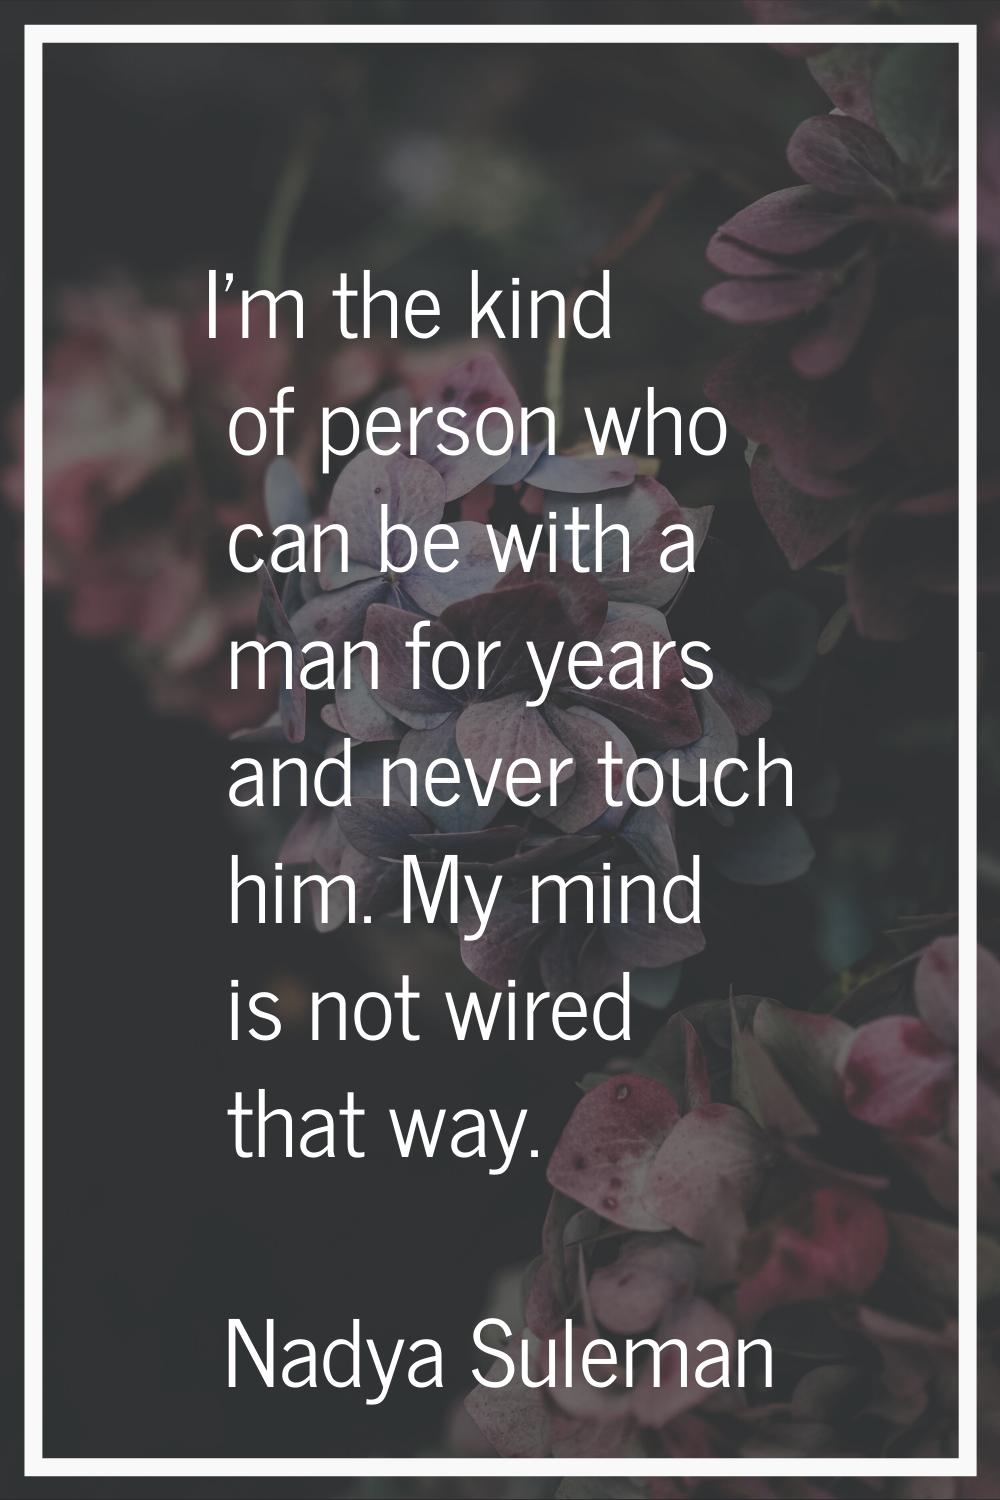 I'm the kind of person who can be with a man for years and never touch him. My mind is not wired th